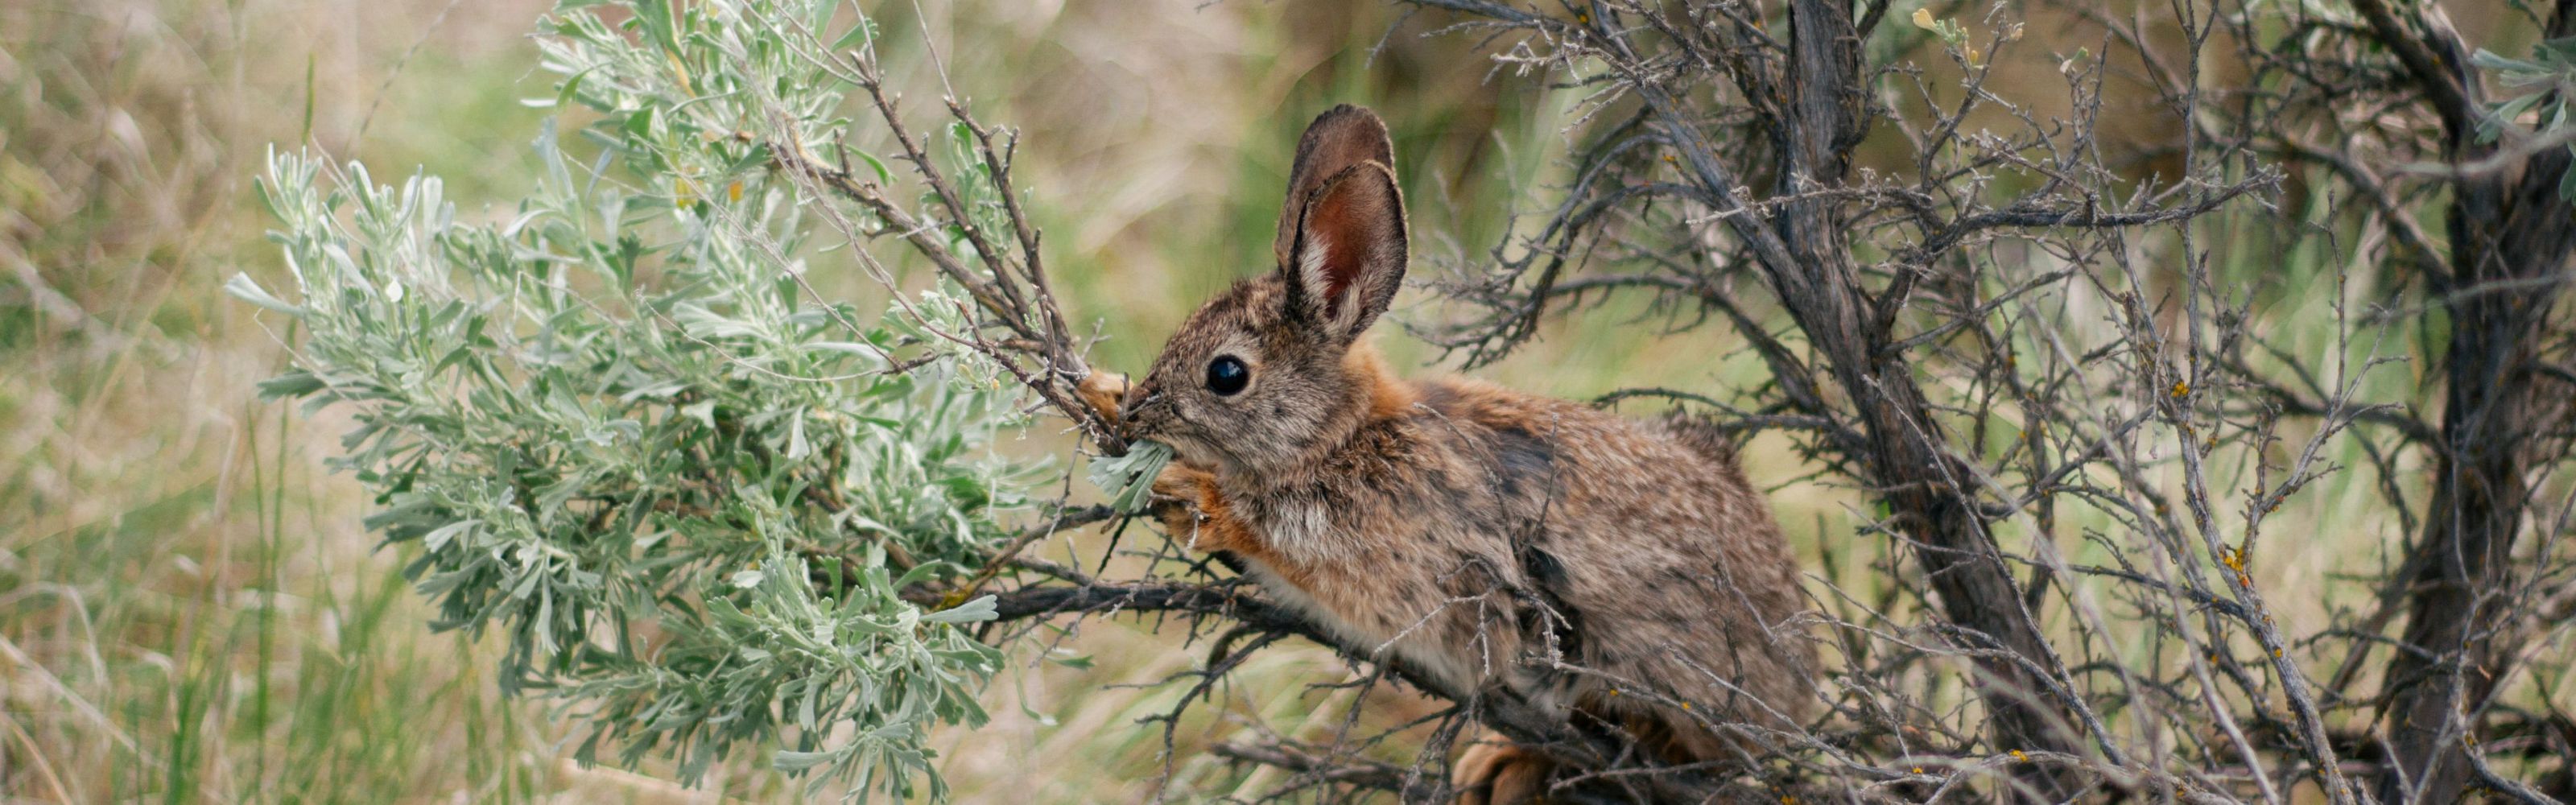 A pygmy rabbit hanging on a tree branch.